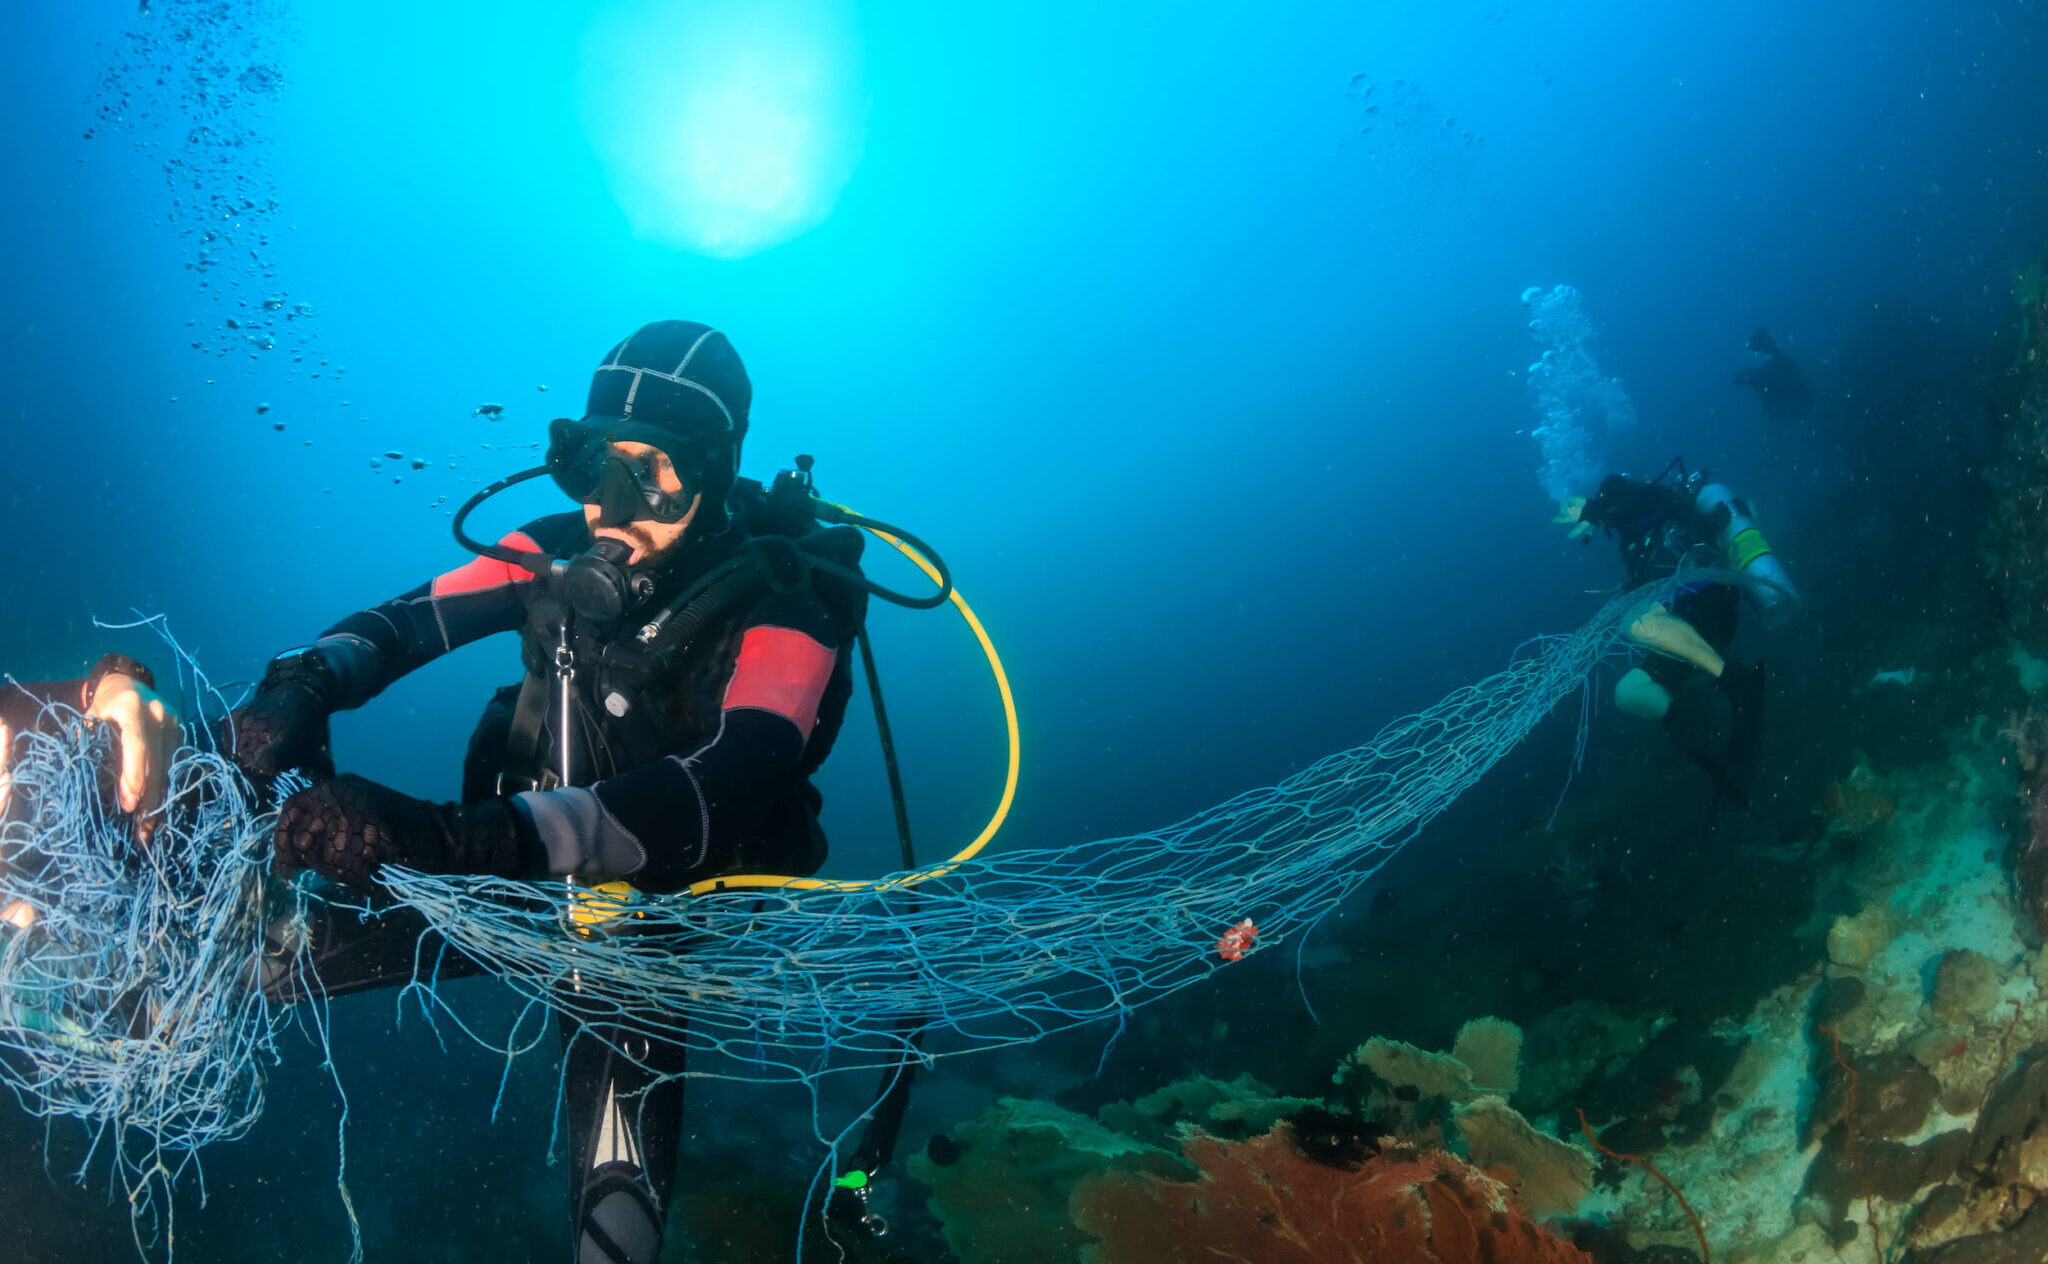 Scuba divers removing a big ghost fishing net from the reef, one of many amazing marine stories when it comes to conservation